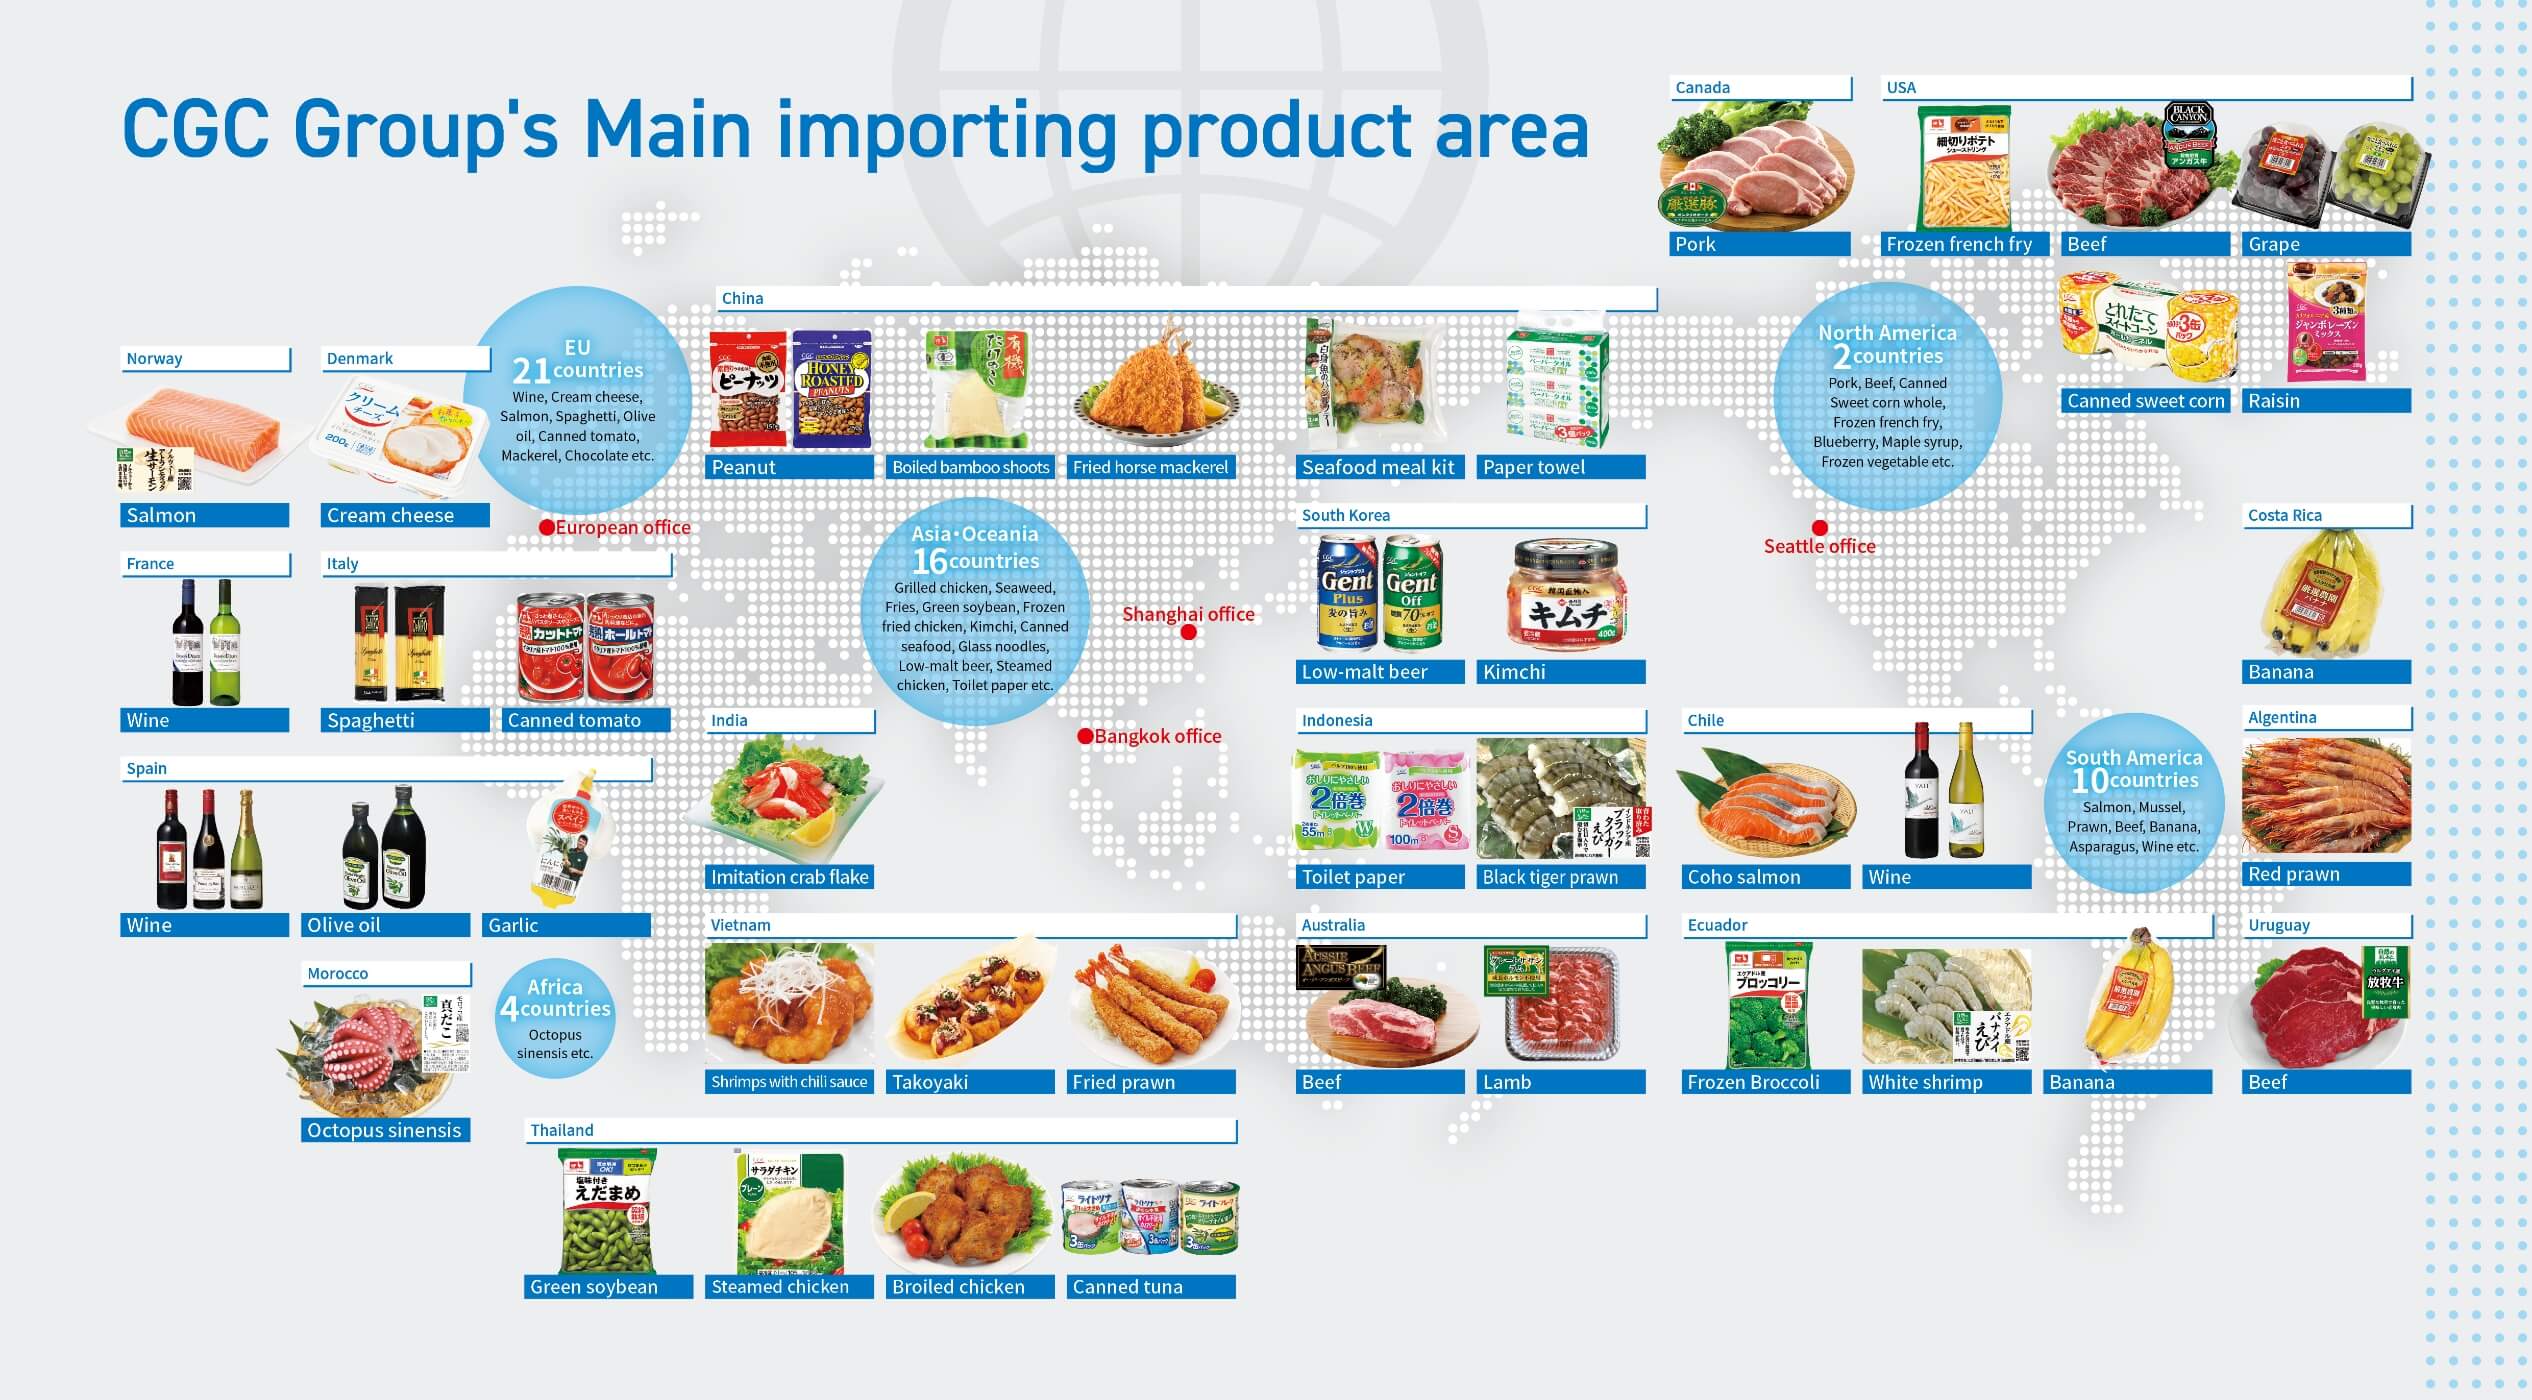 WE IMPORT PRODUCTS FROM 48 COUNTRIES